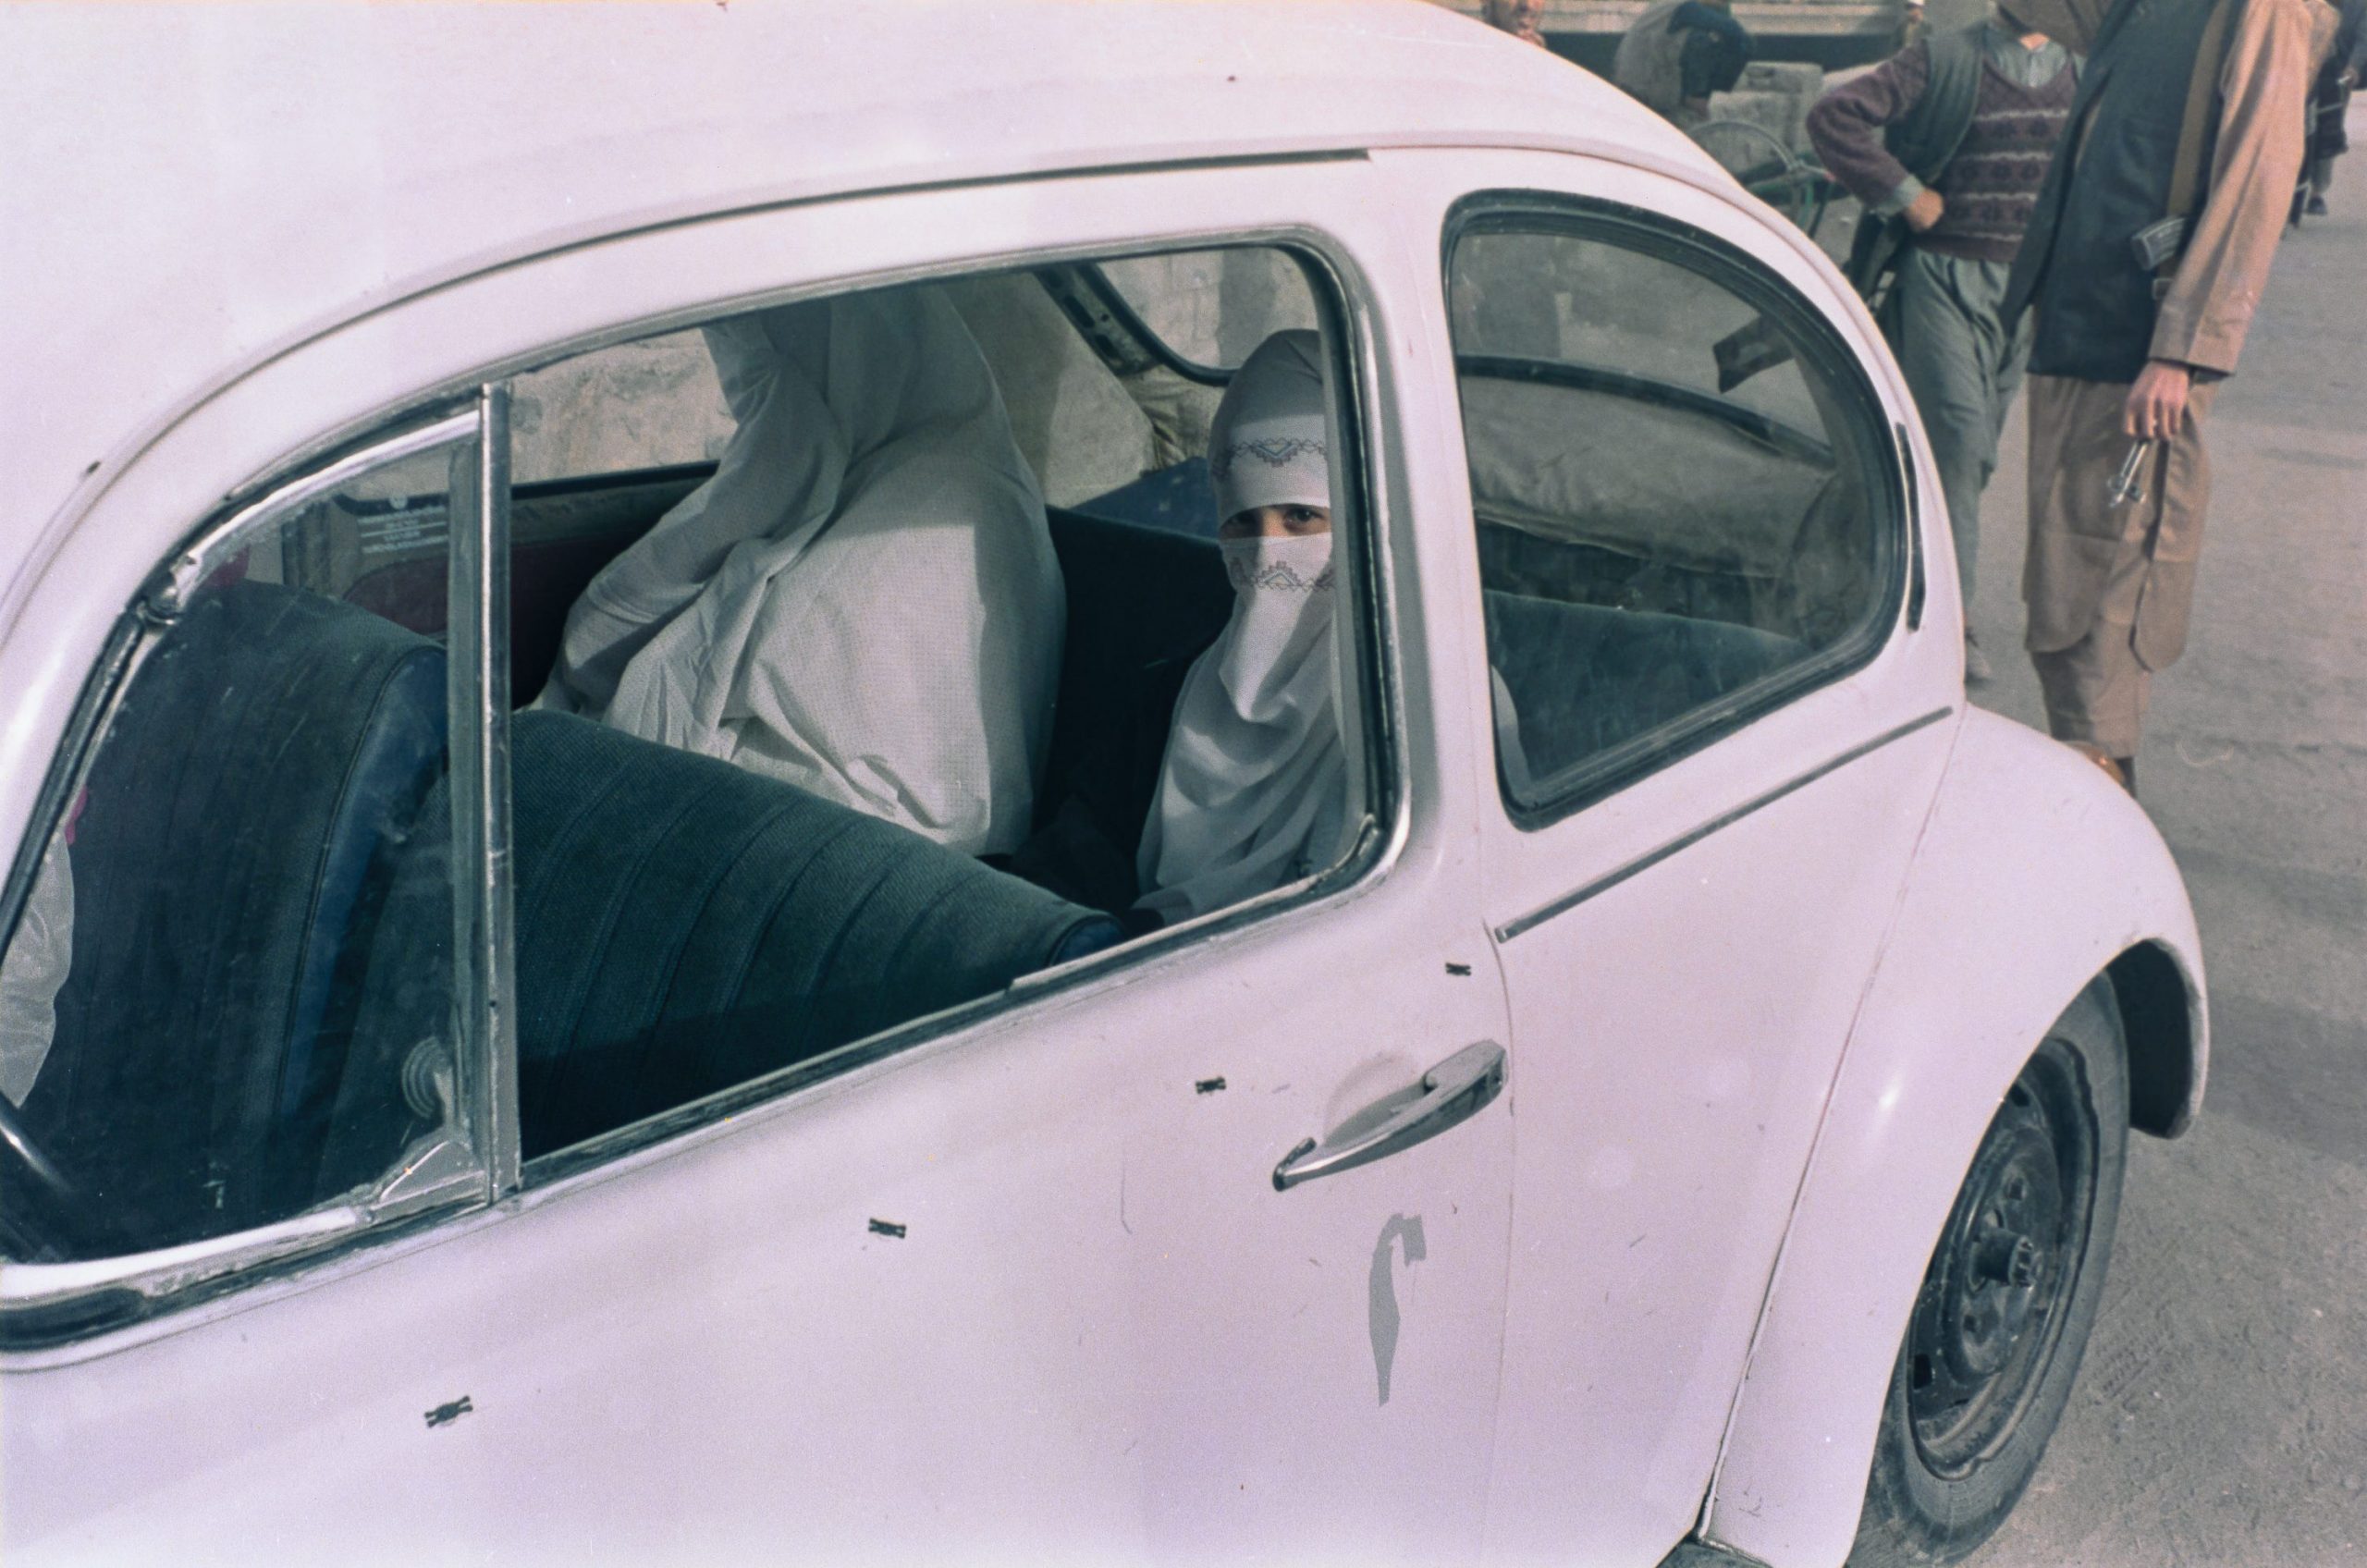 Two women, fully veiled, are seen in the back of a car.